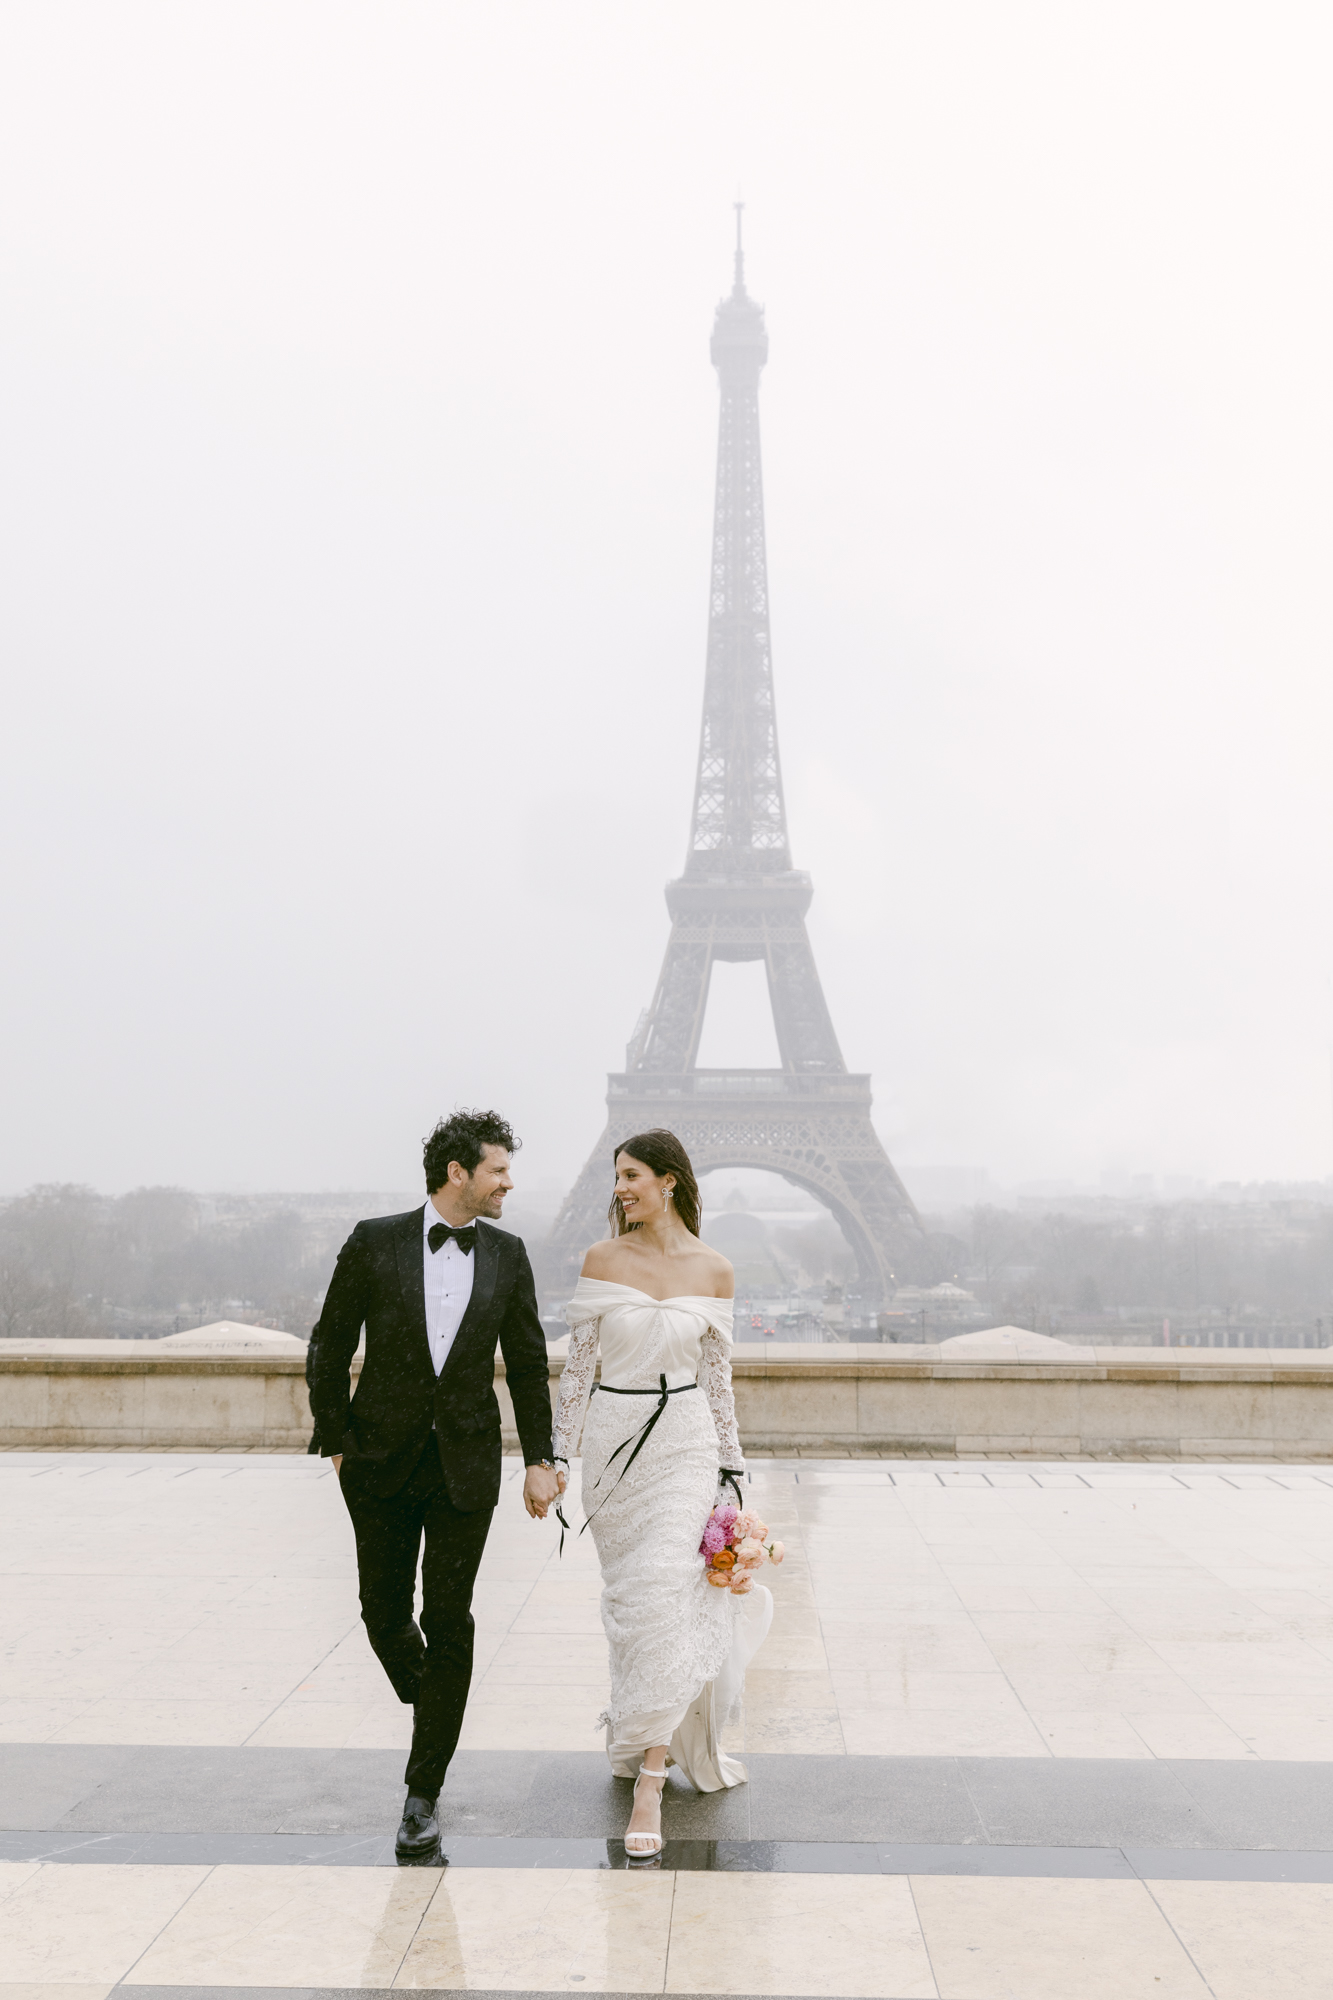 Bride and groom at Trocadéro in Paris, France. Walking away from the Eiffel Tower on a rainy day in their wedding dress and tuxedo.